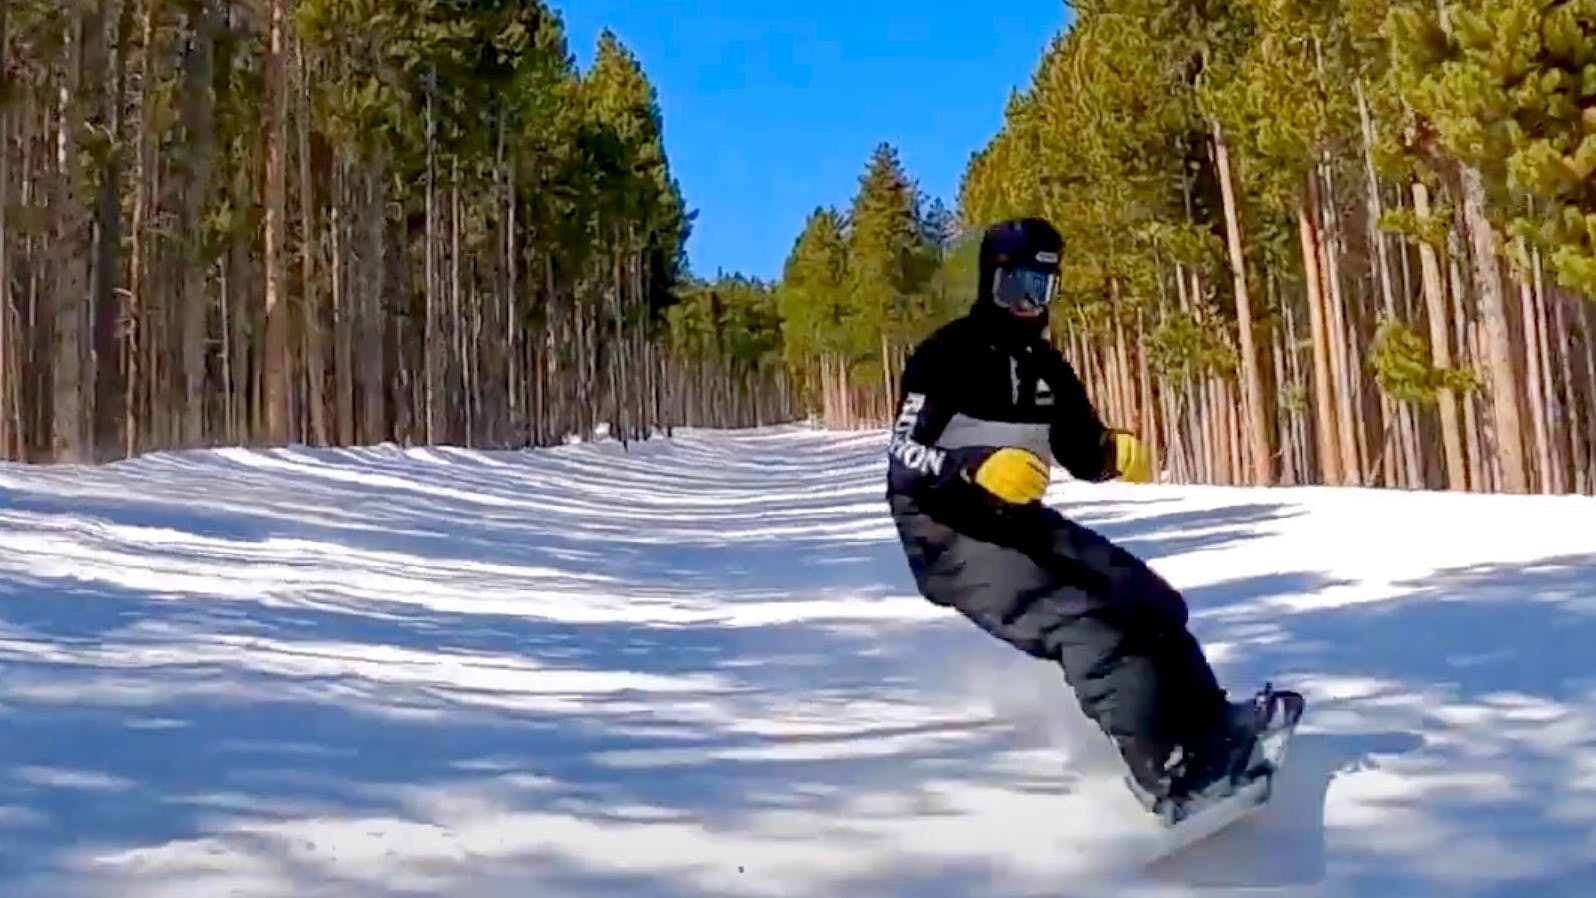 A screenshot of the YouTube video shows Bobby riding downhill in an open space between dense forest. The sky is a brilliant blue behind him.